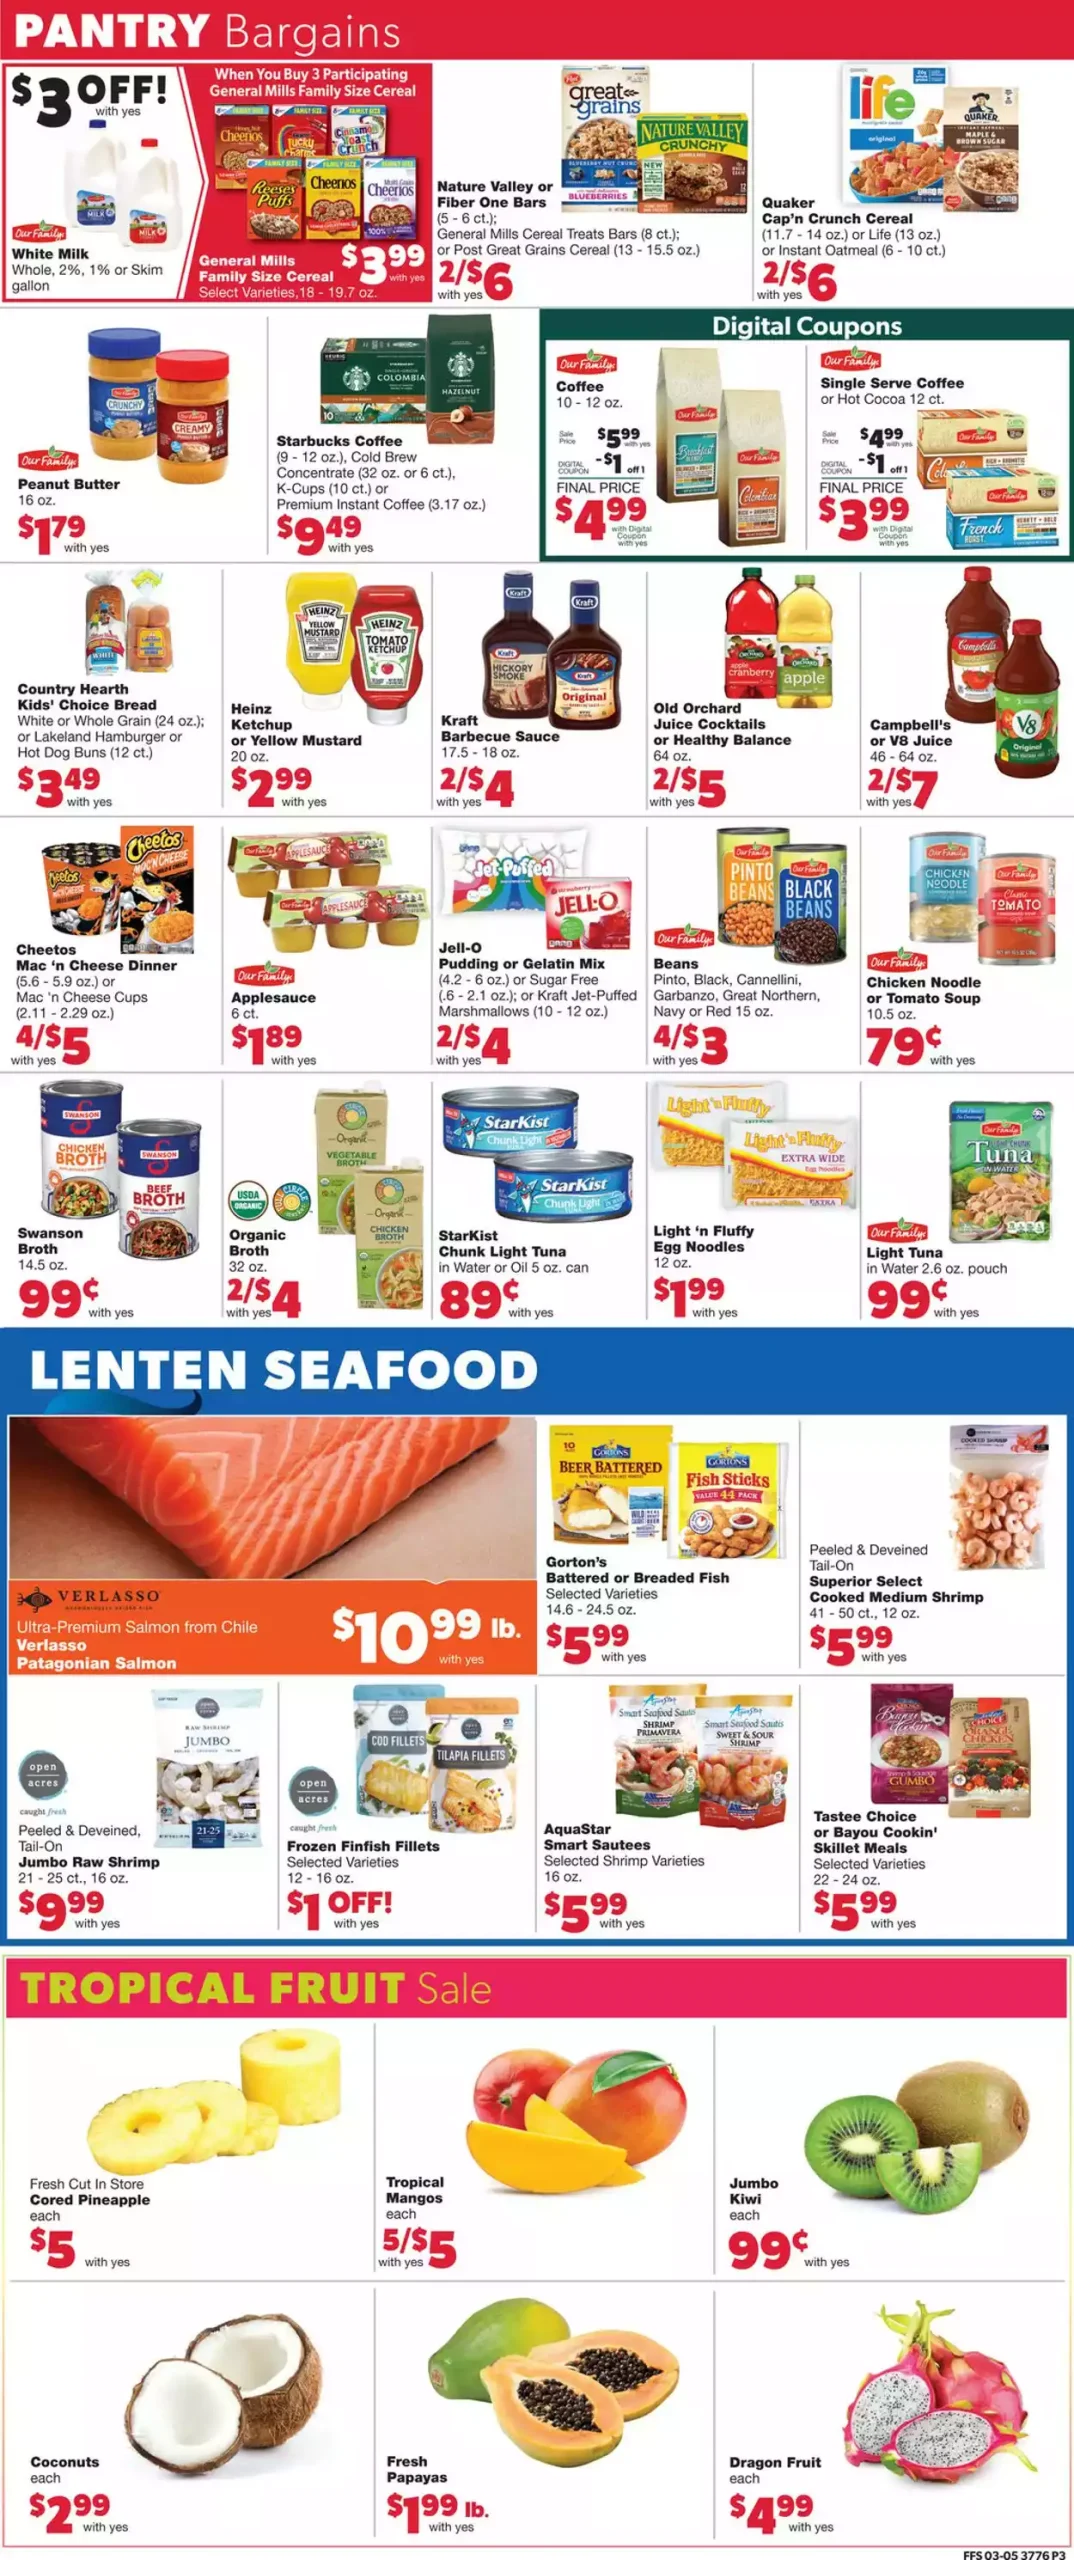 Family Fare Weekly Ad Preview for March 22 - 28, 2023 2